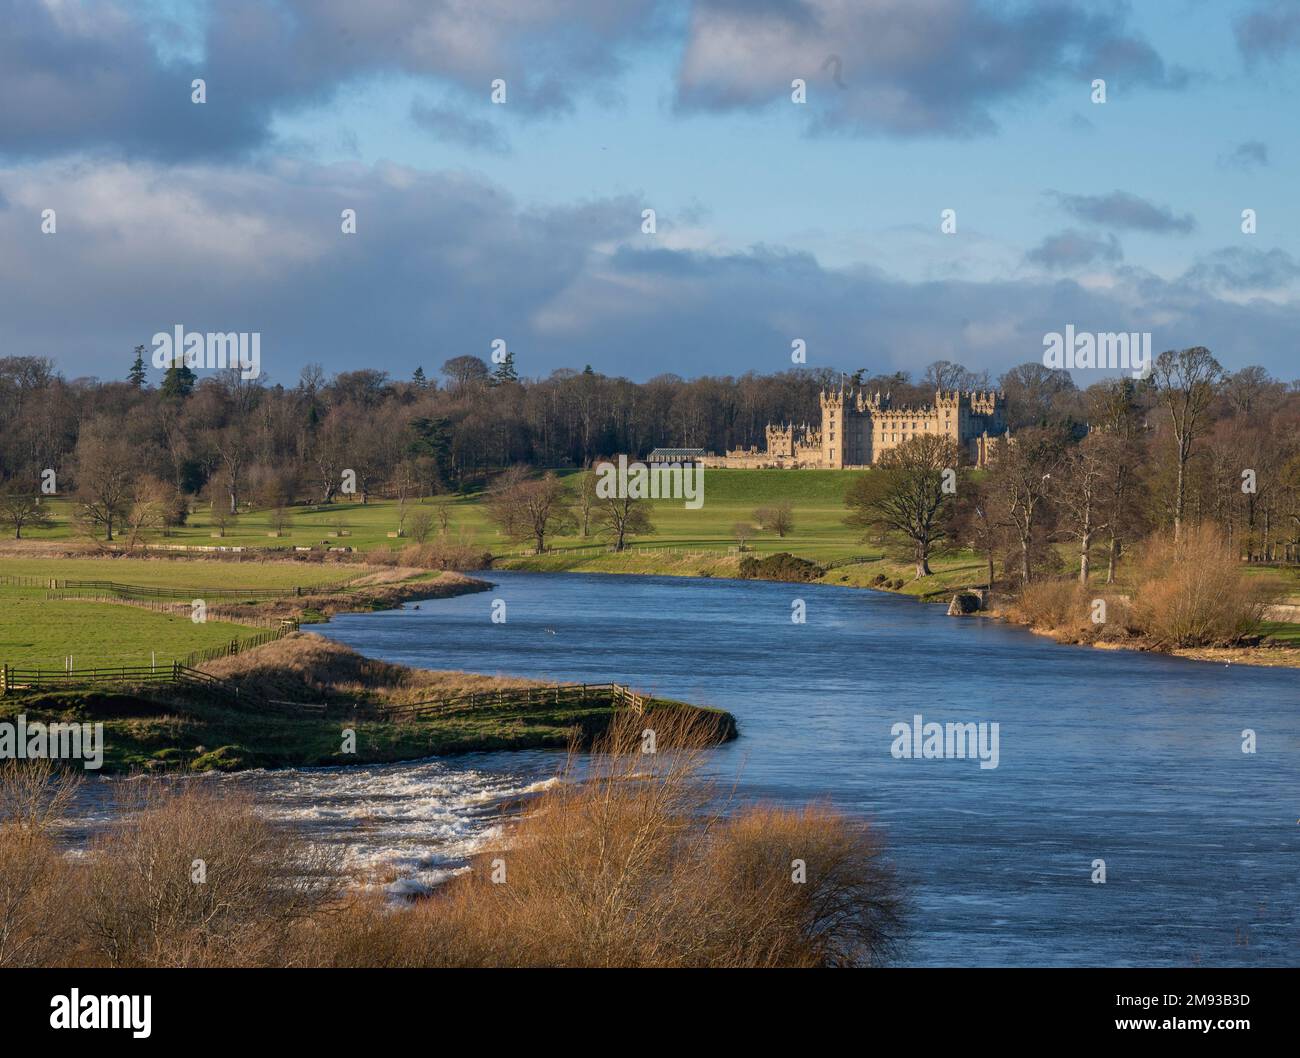 Scotland, Kelso  A view looking along the River Tweed towards Floors Castle in the distance at Kelso in the Scottish Borders, Scotland. UK.  Picture P Stock Photo